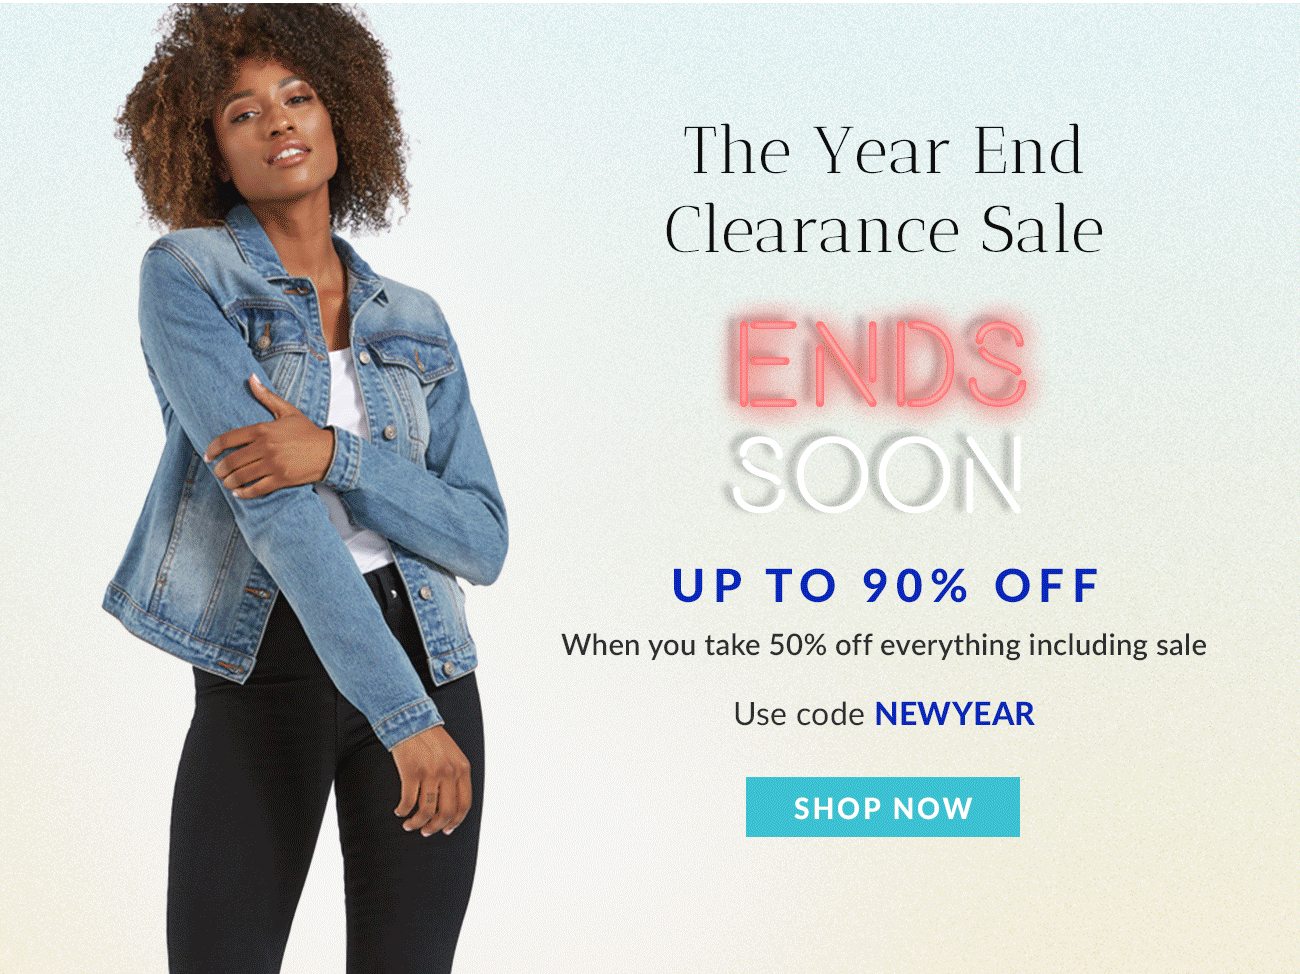 The Year End Clearance Sale Ends Soon - Up to 90% OFF - Code: NEWYEAR - Shop Now